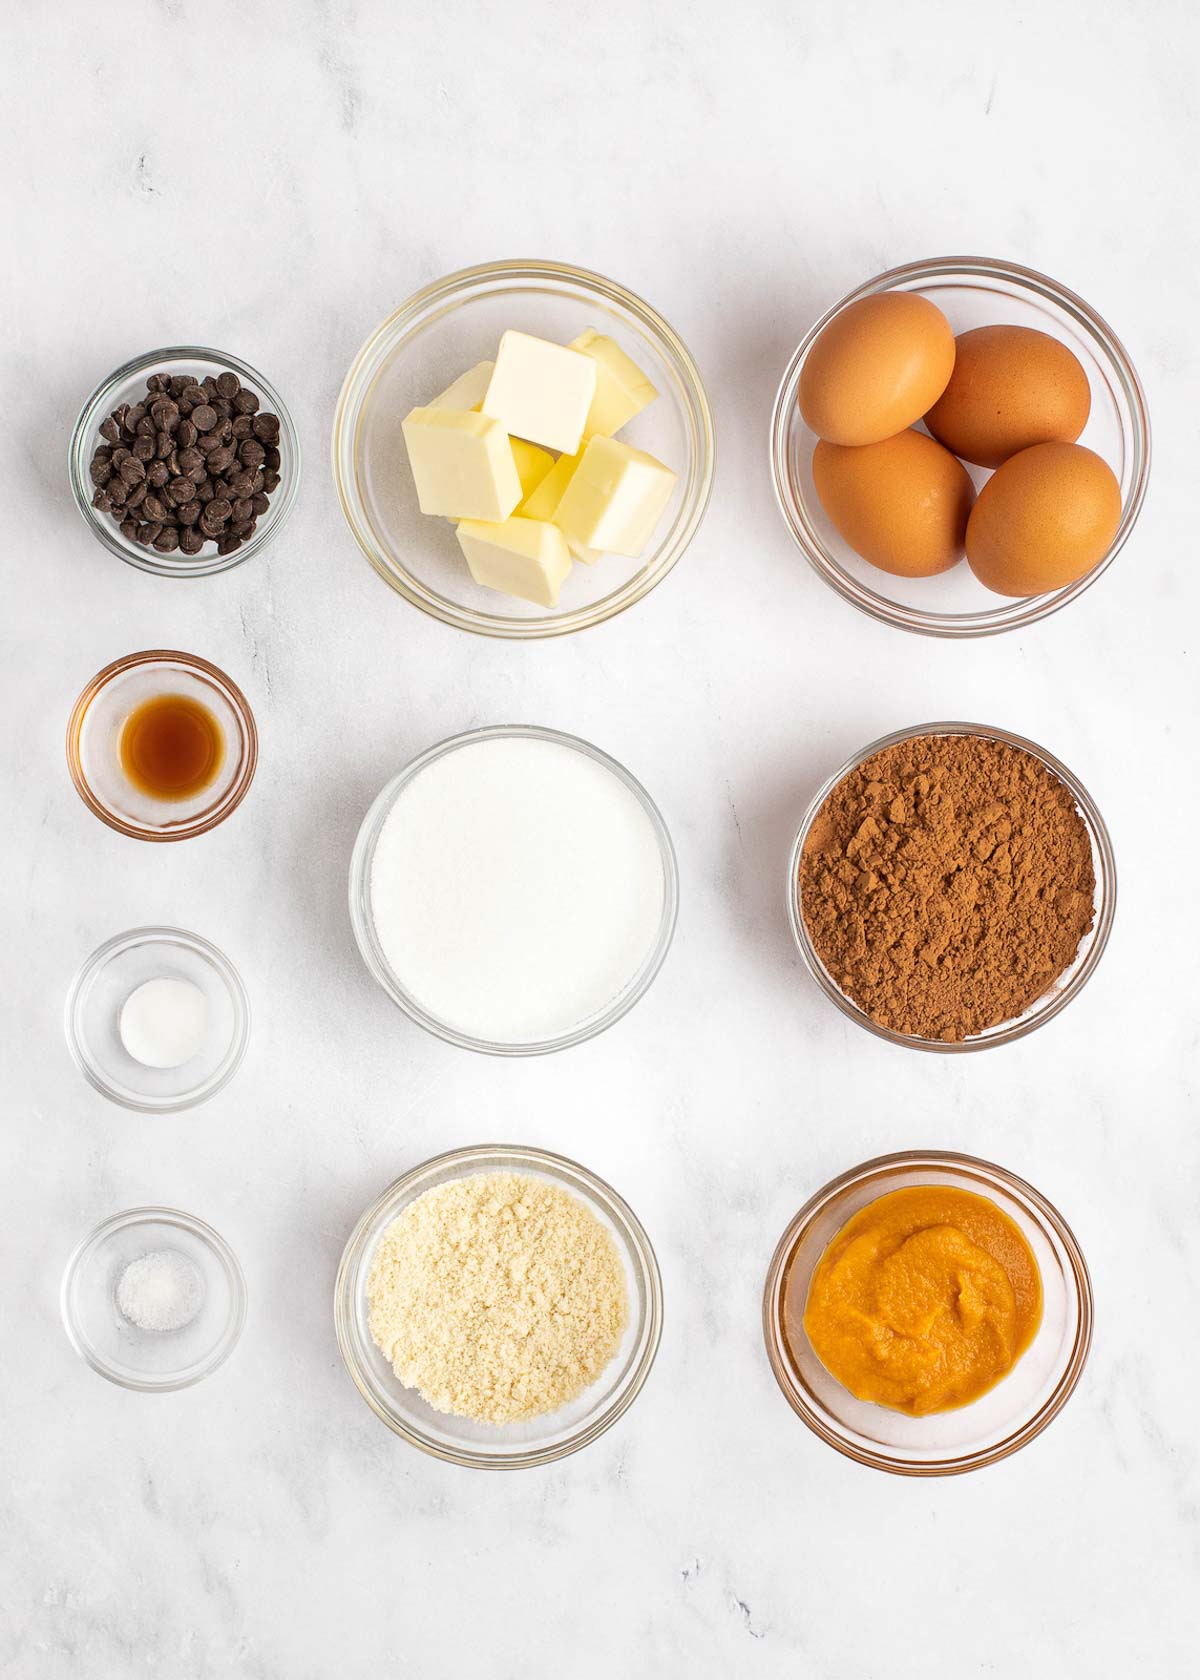 Overhead view of the ingredients needed for keto brownies: a bowl of eggs, a bowl of butter, a bowl of dark chocolate chips, a bowl of cocoa powder, a bowl of monkfruit sweetener, a bowl of pumpkin puree, a bowl of almond flour, a bowl of vanilla extract, a bowl of salt, and a bowl of baking soda